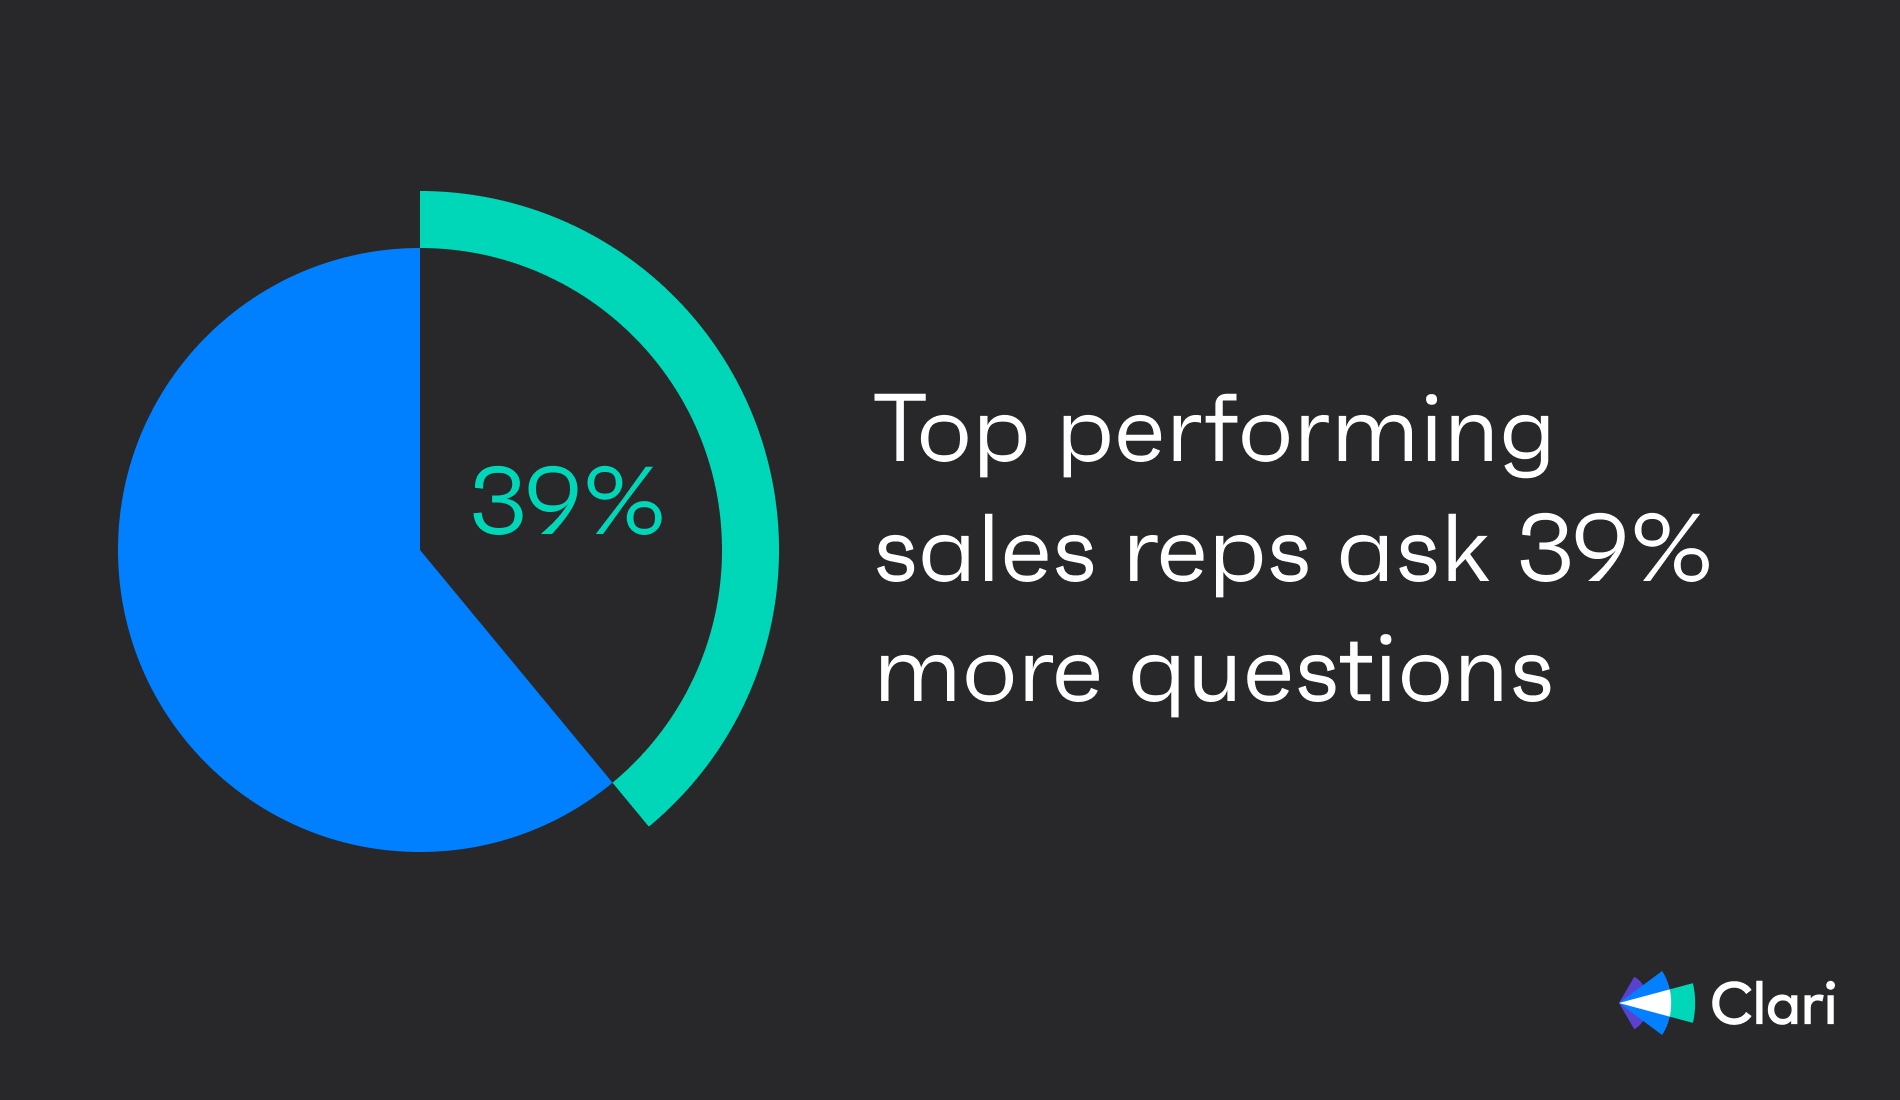 Top performing sales reps ask 39% more questions.